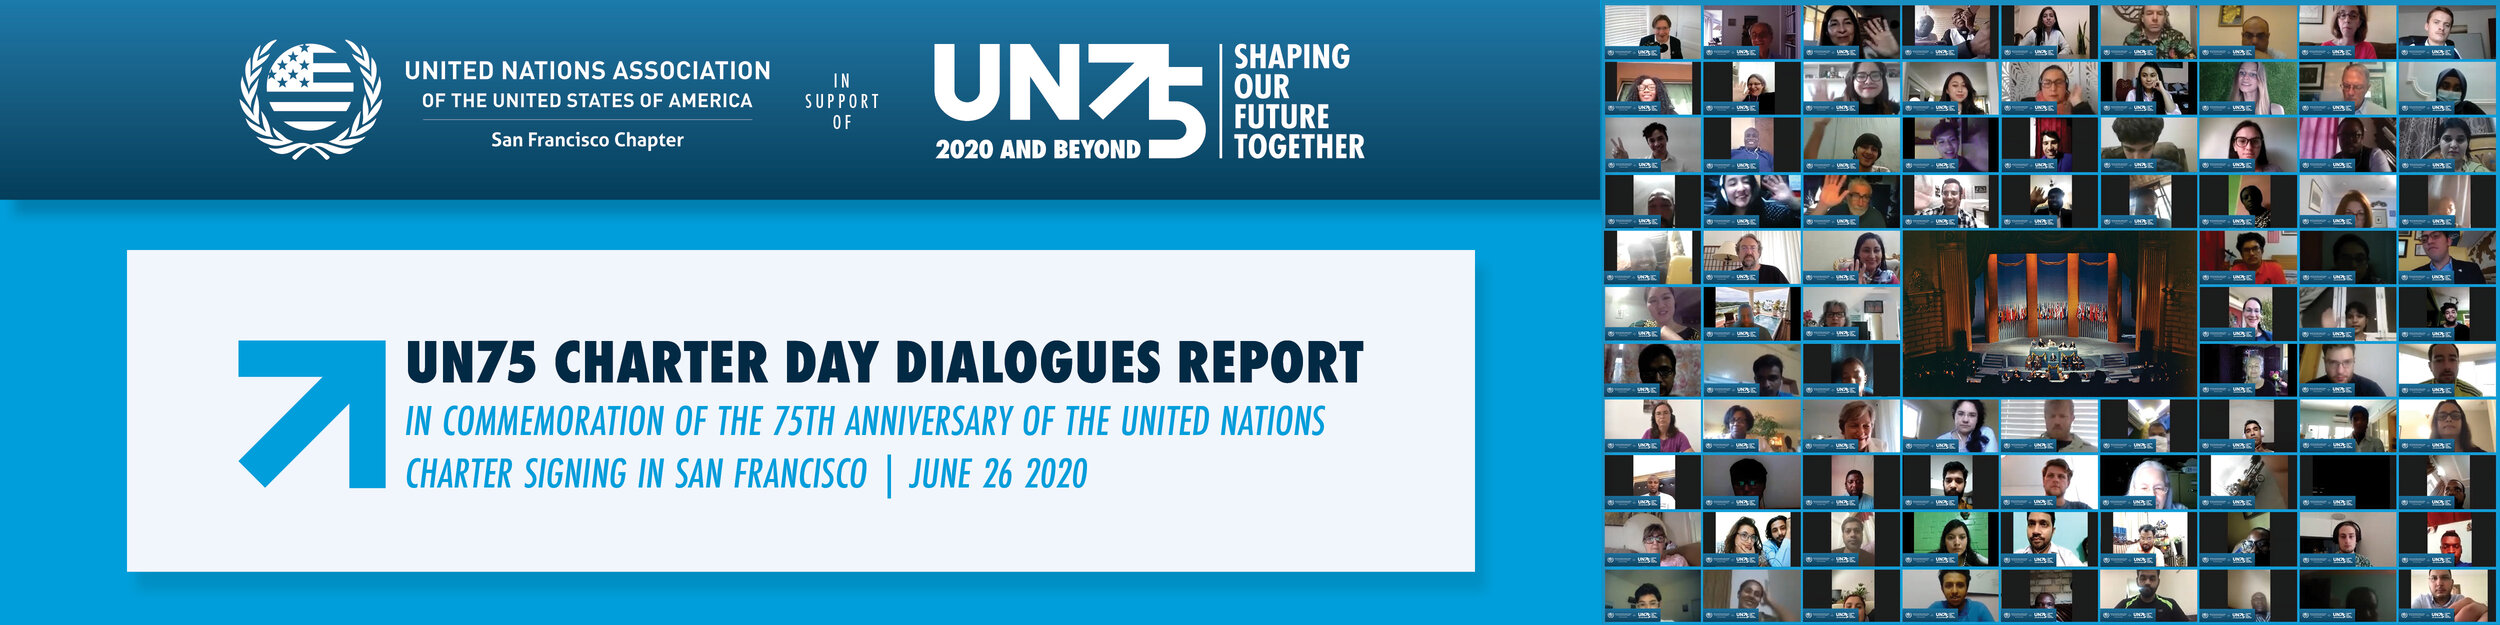 UN75 Charter Day Dialogues Report